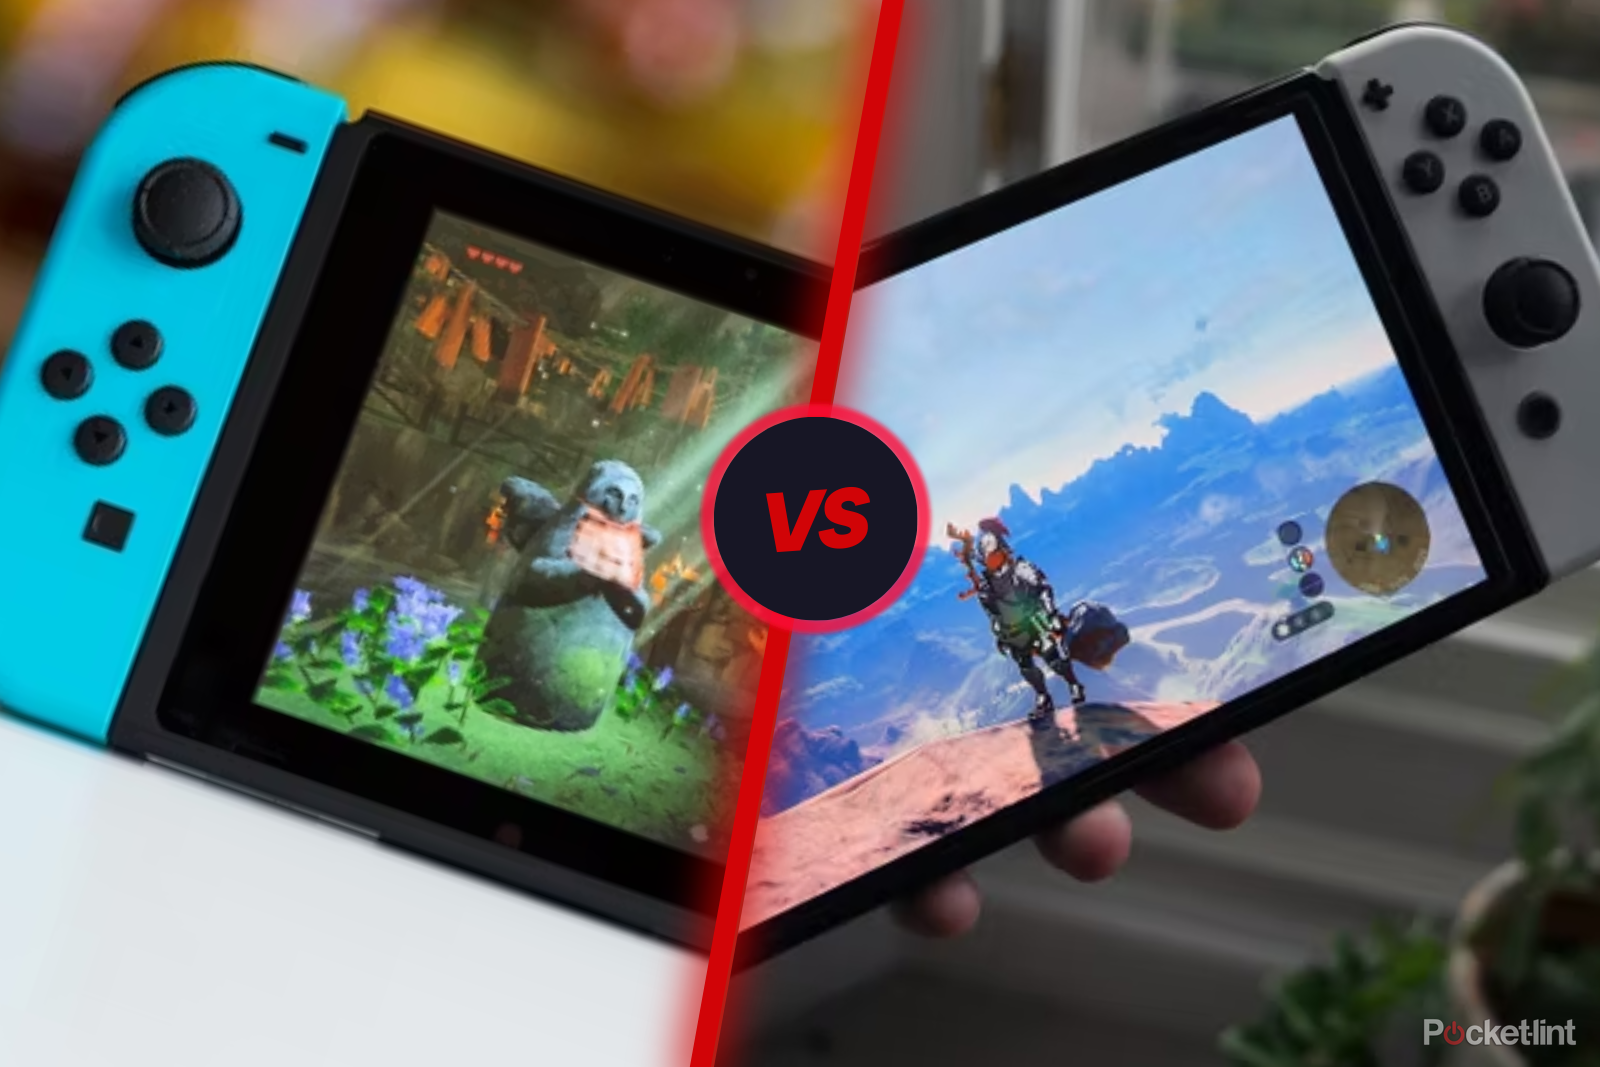 Switch vs OLED Switch thumbnail of two hand-ons images of both devices with VS inbetween